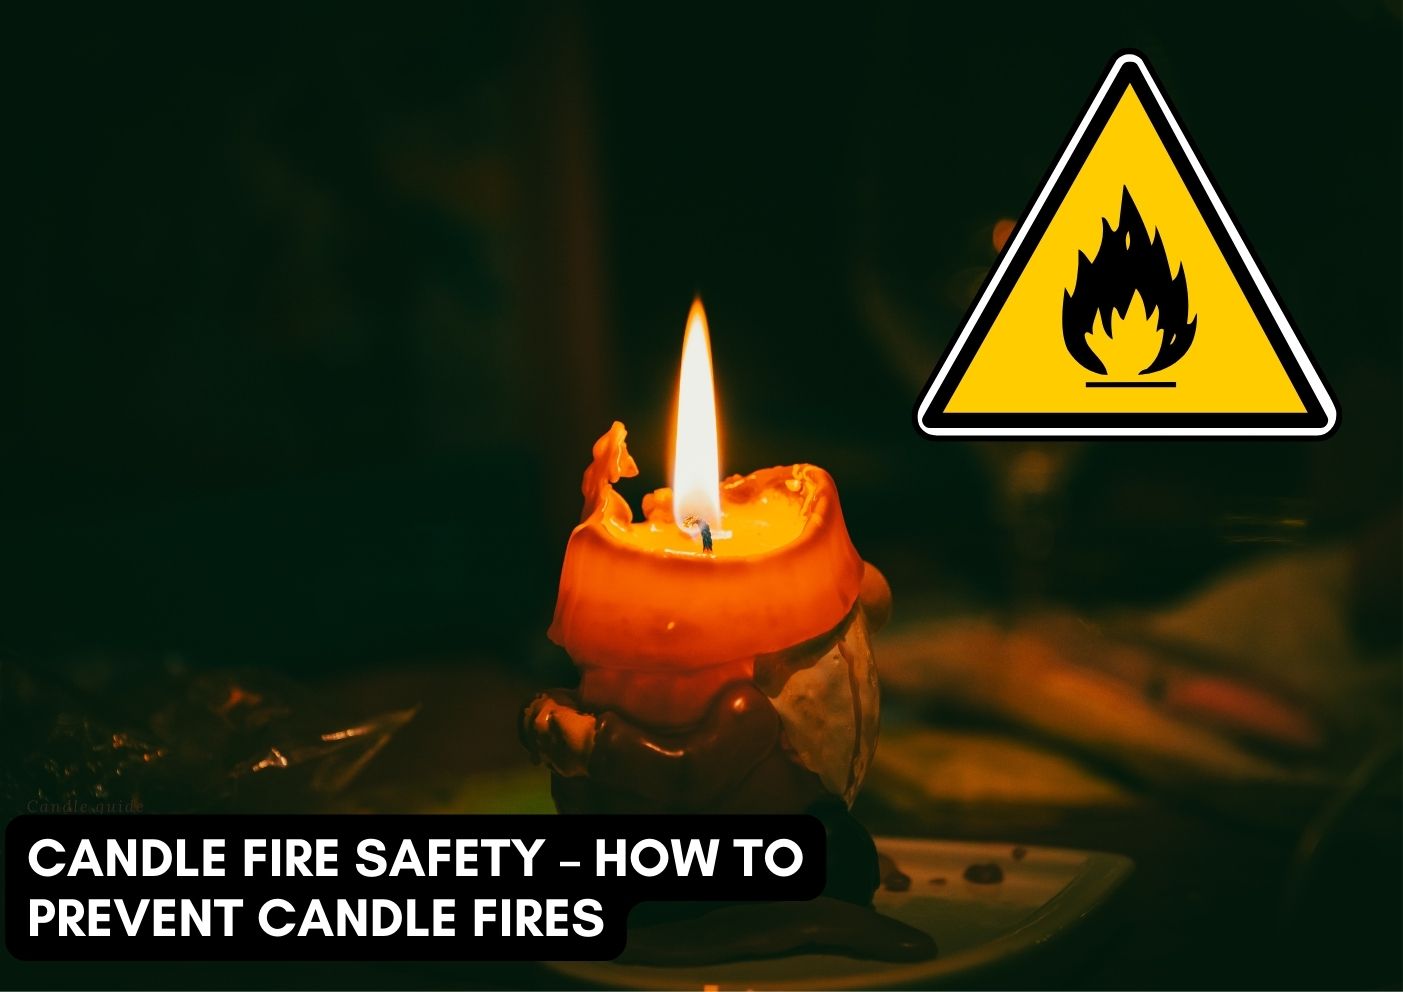 Candle fire safety